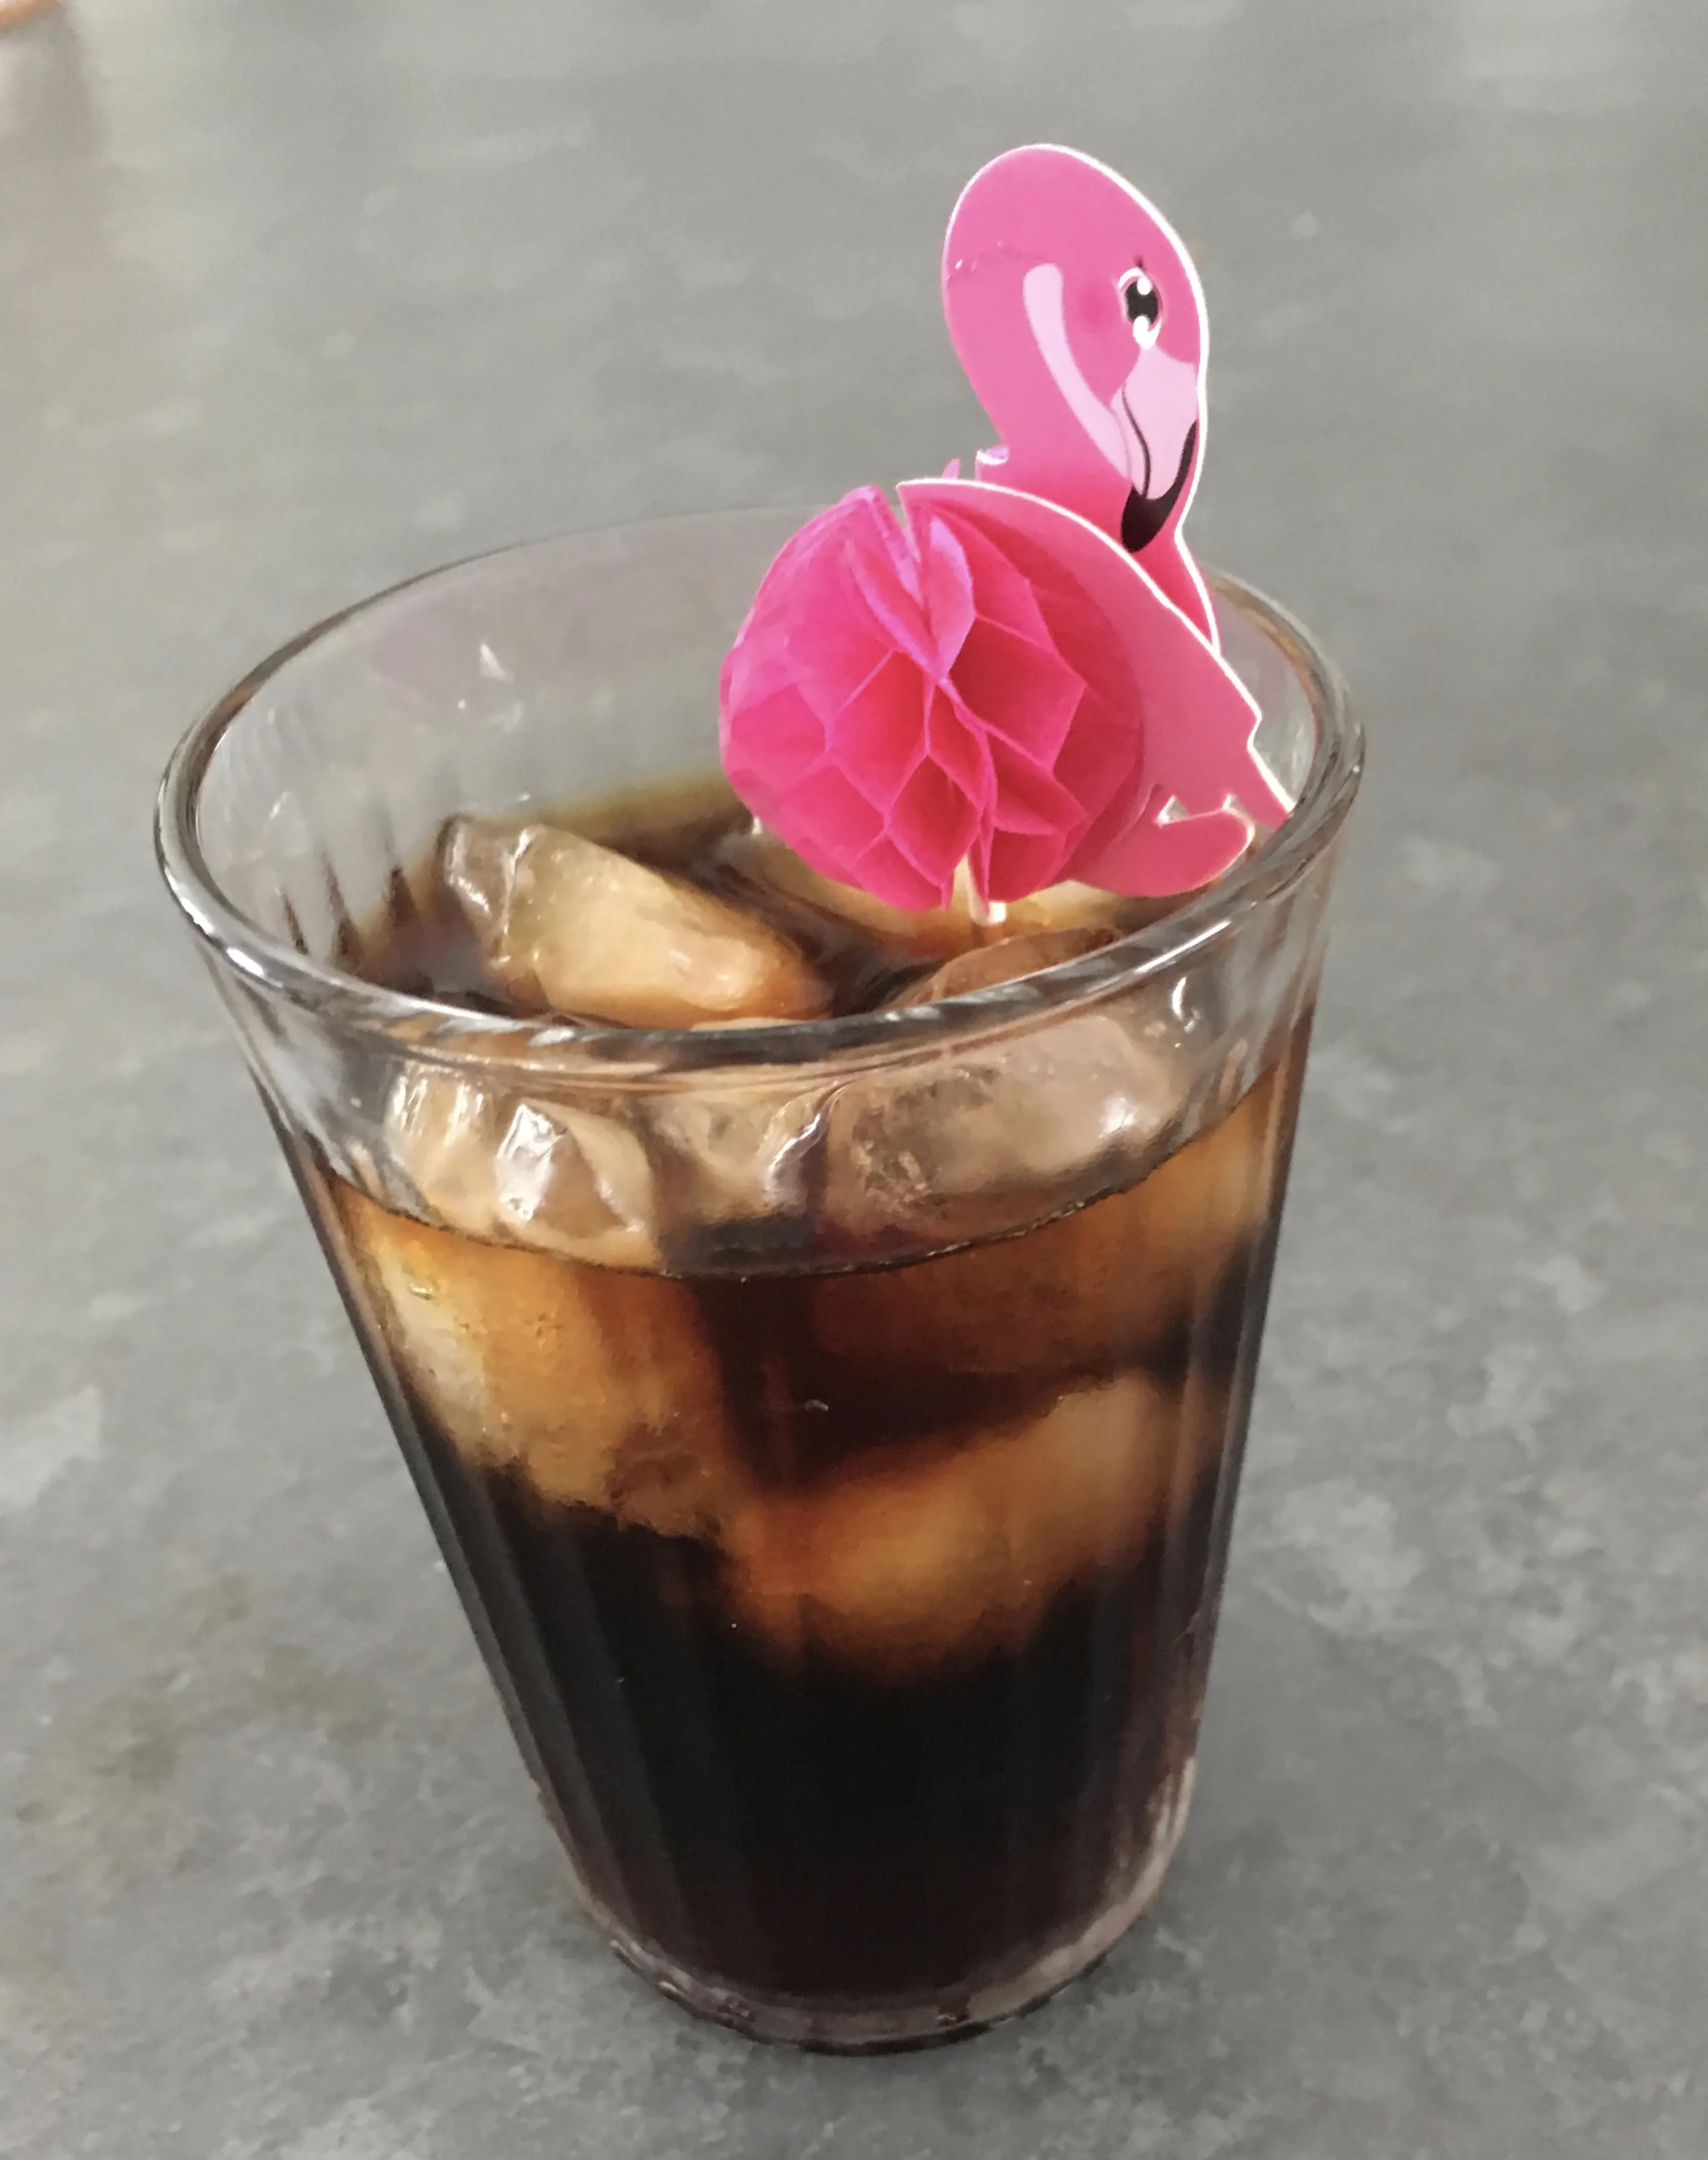 5 Ways To Make Italian Style Iced Coffee at Home